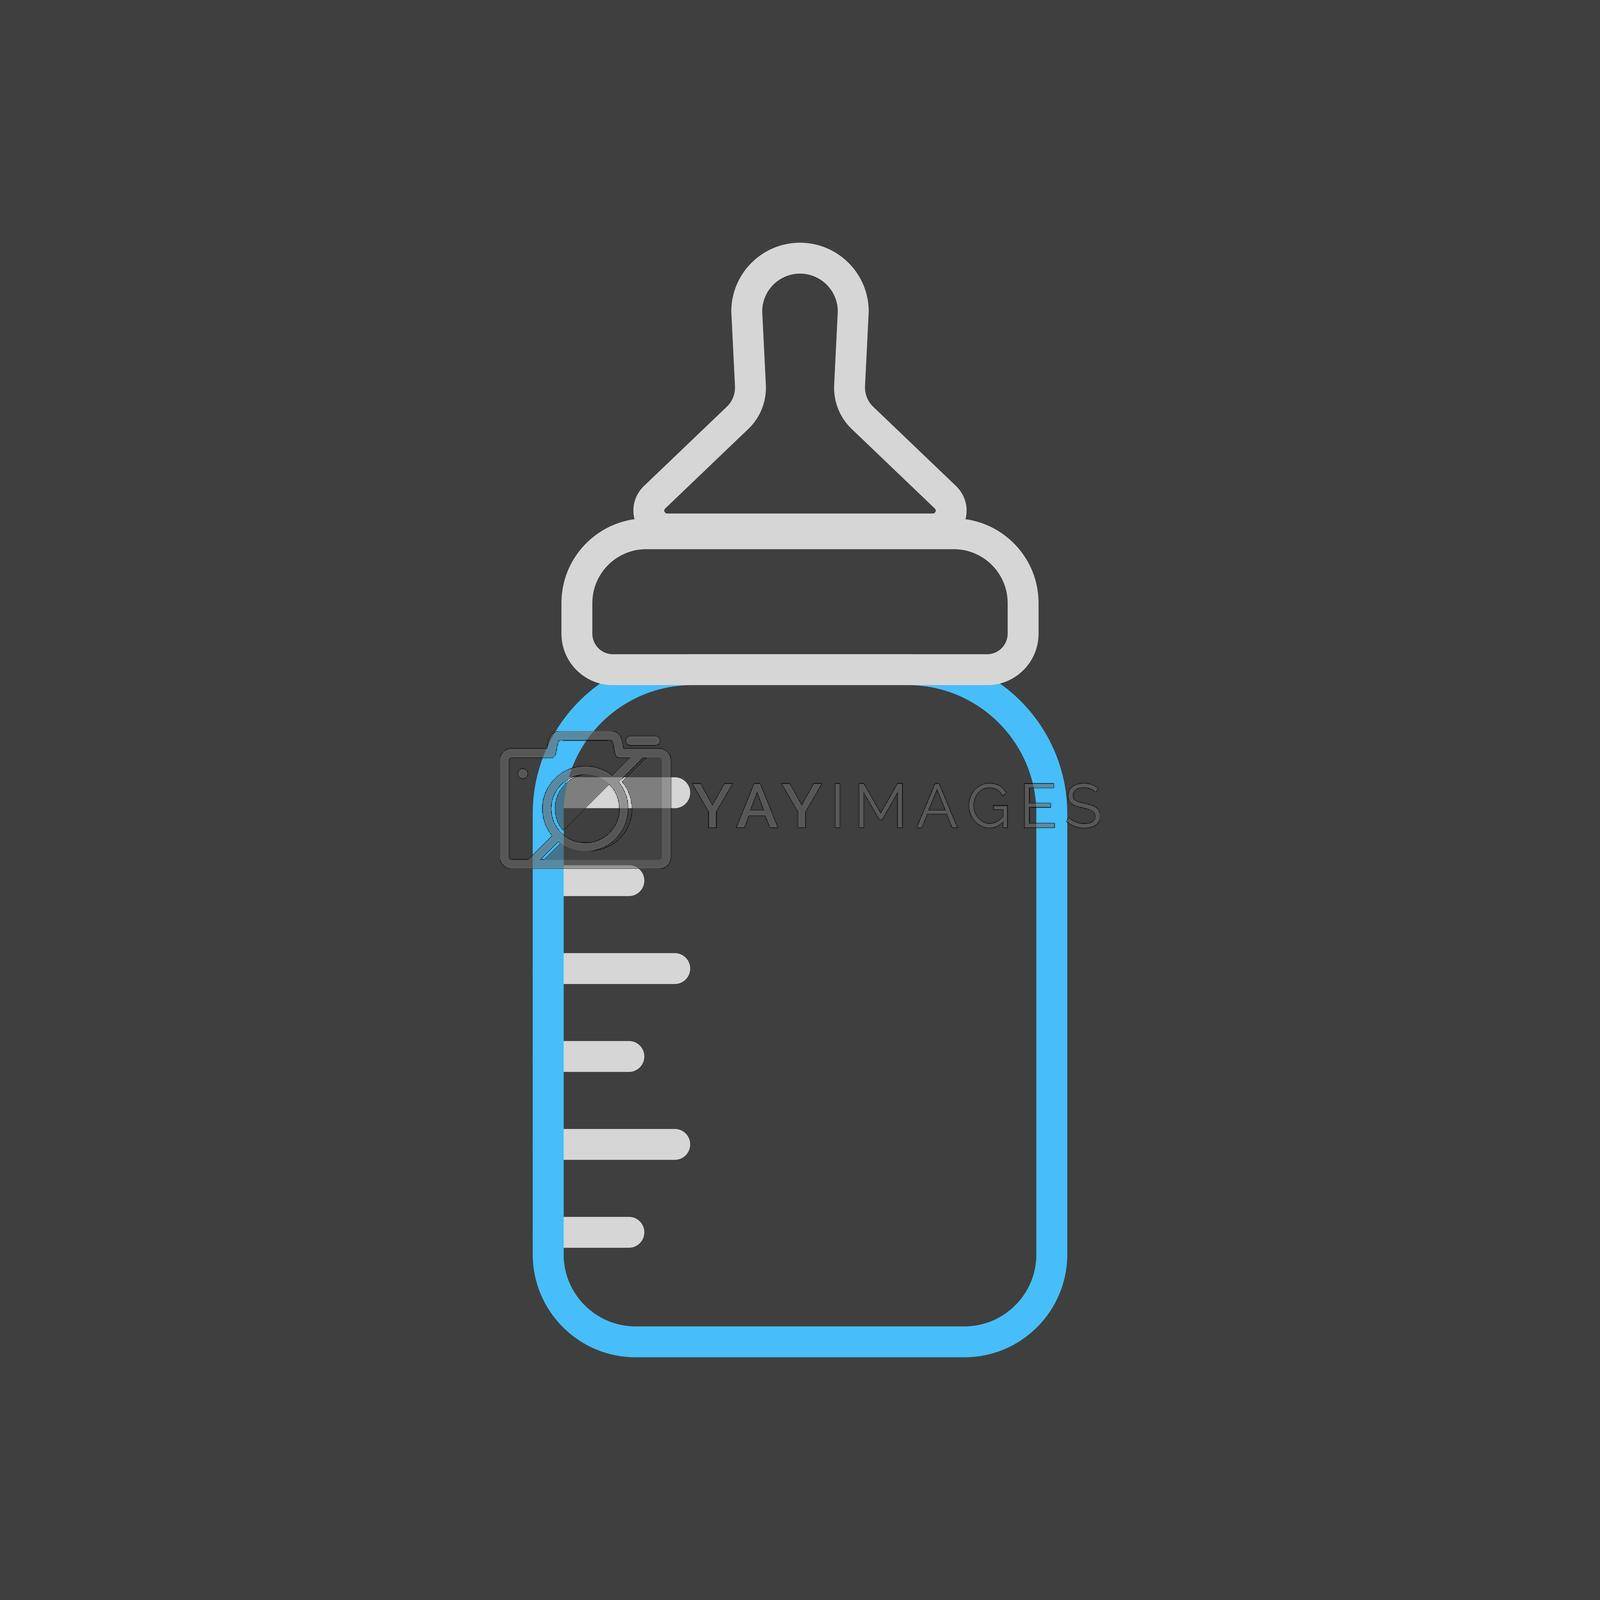 Baby feeding bottle vector icon. Graph symbol for children and newborn babies web site and apps design, logo, app, UI